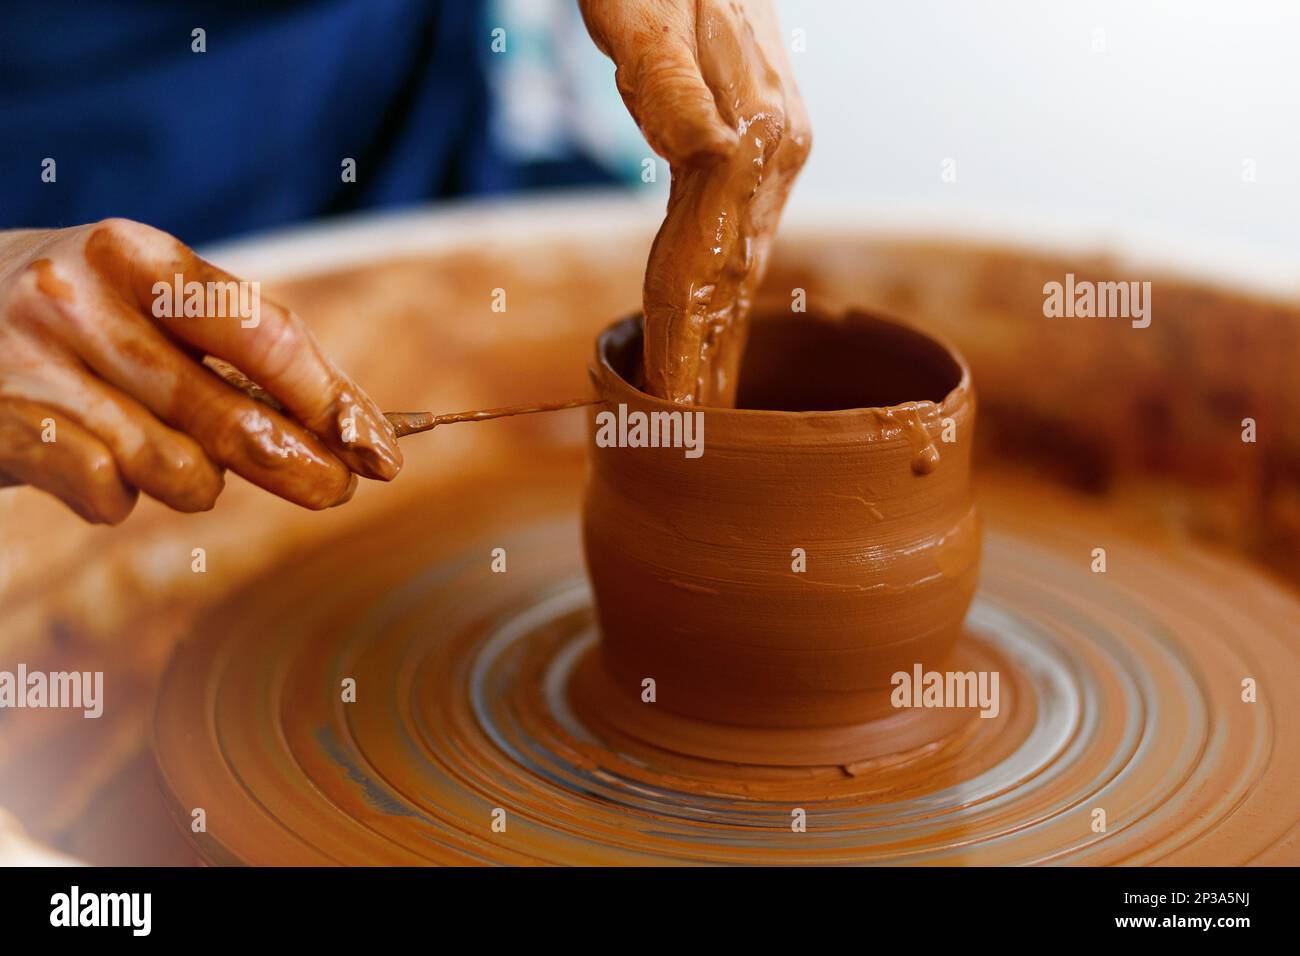 Cropped Image of hands working with Pottery Wheel, close up of shaping clay edges Stock Photo